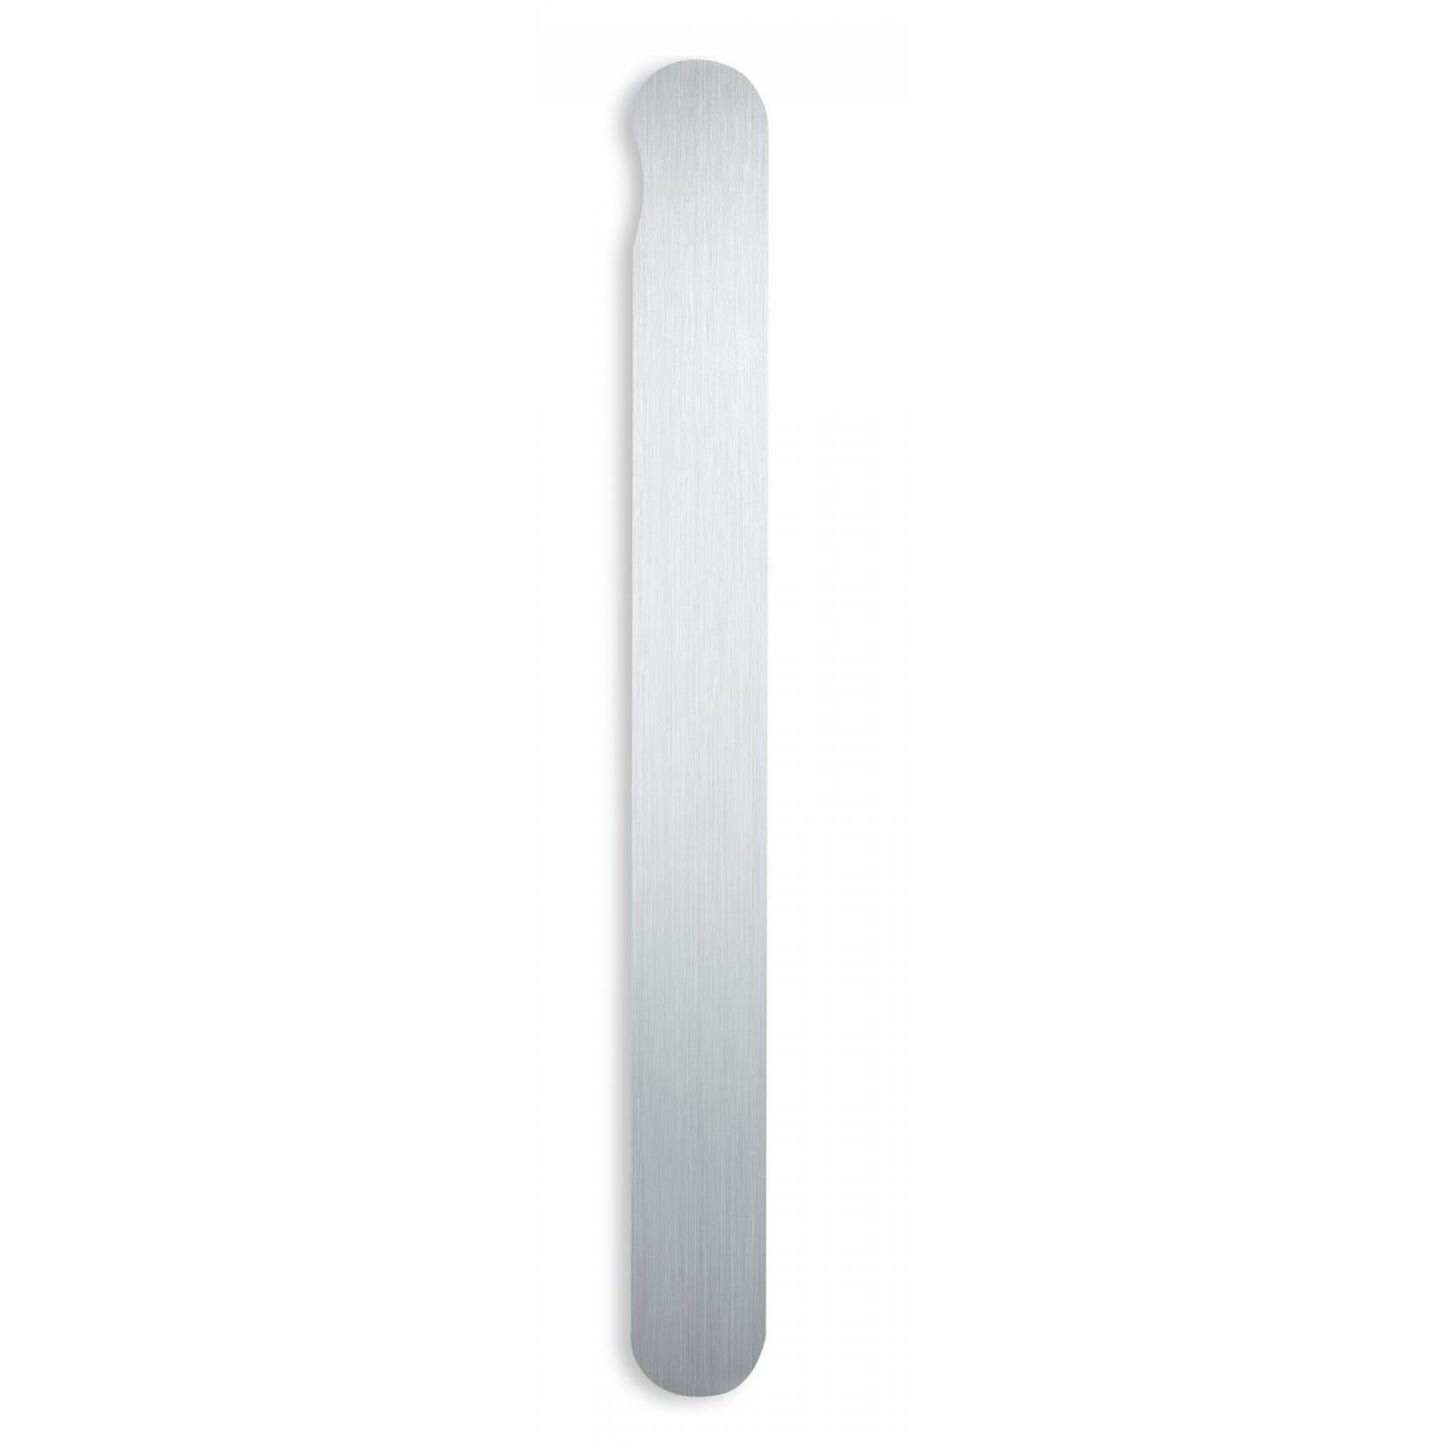 MSE professional stainless steel board 180x19x2mm extra strong for interchangeable files 483 ***